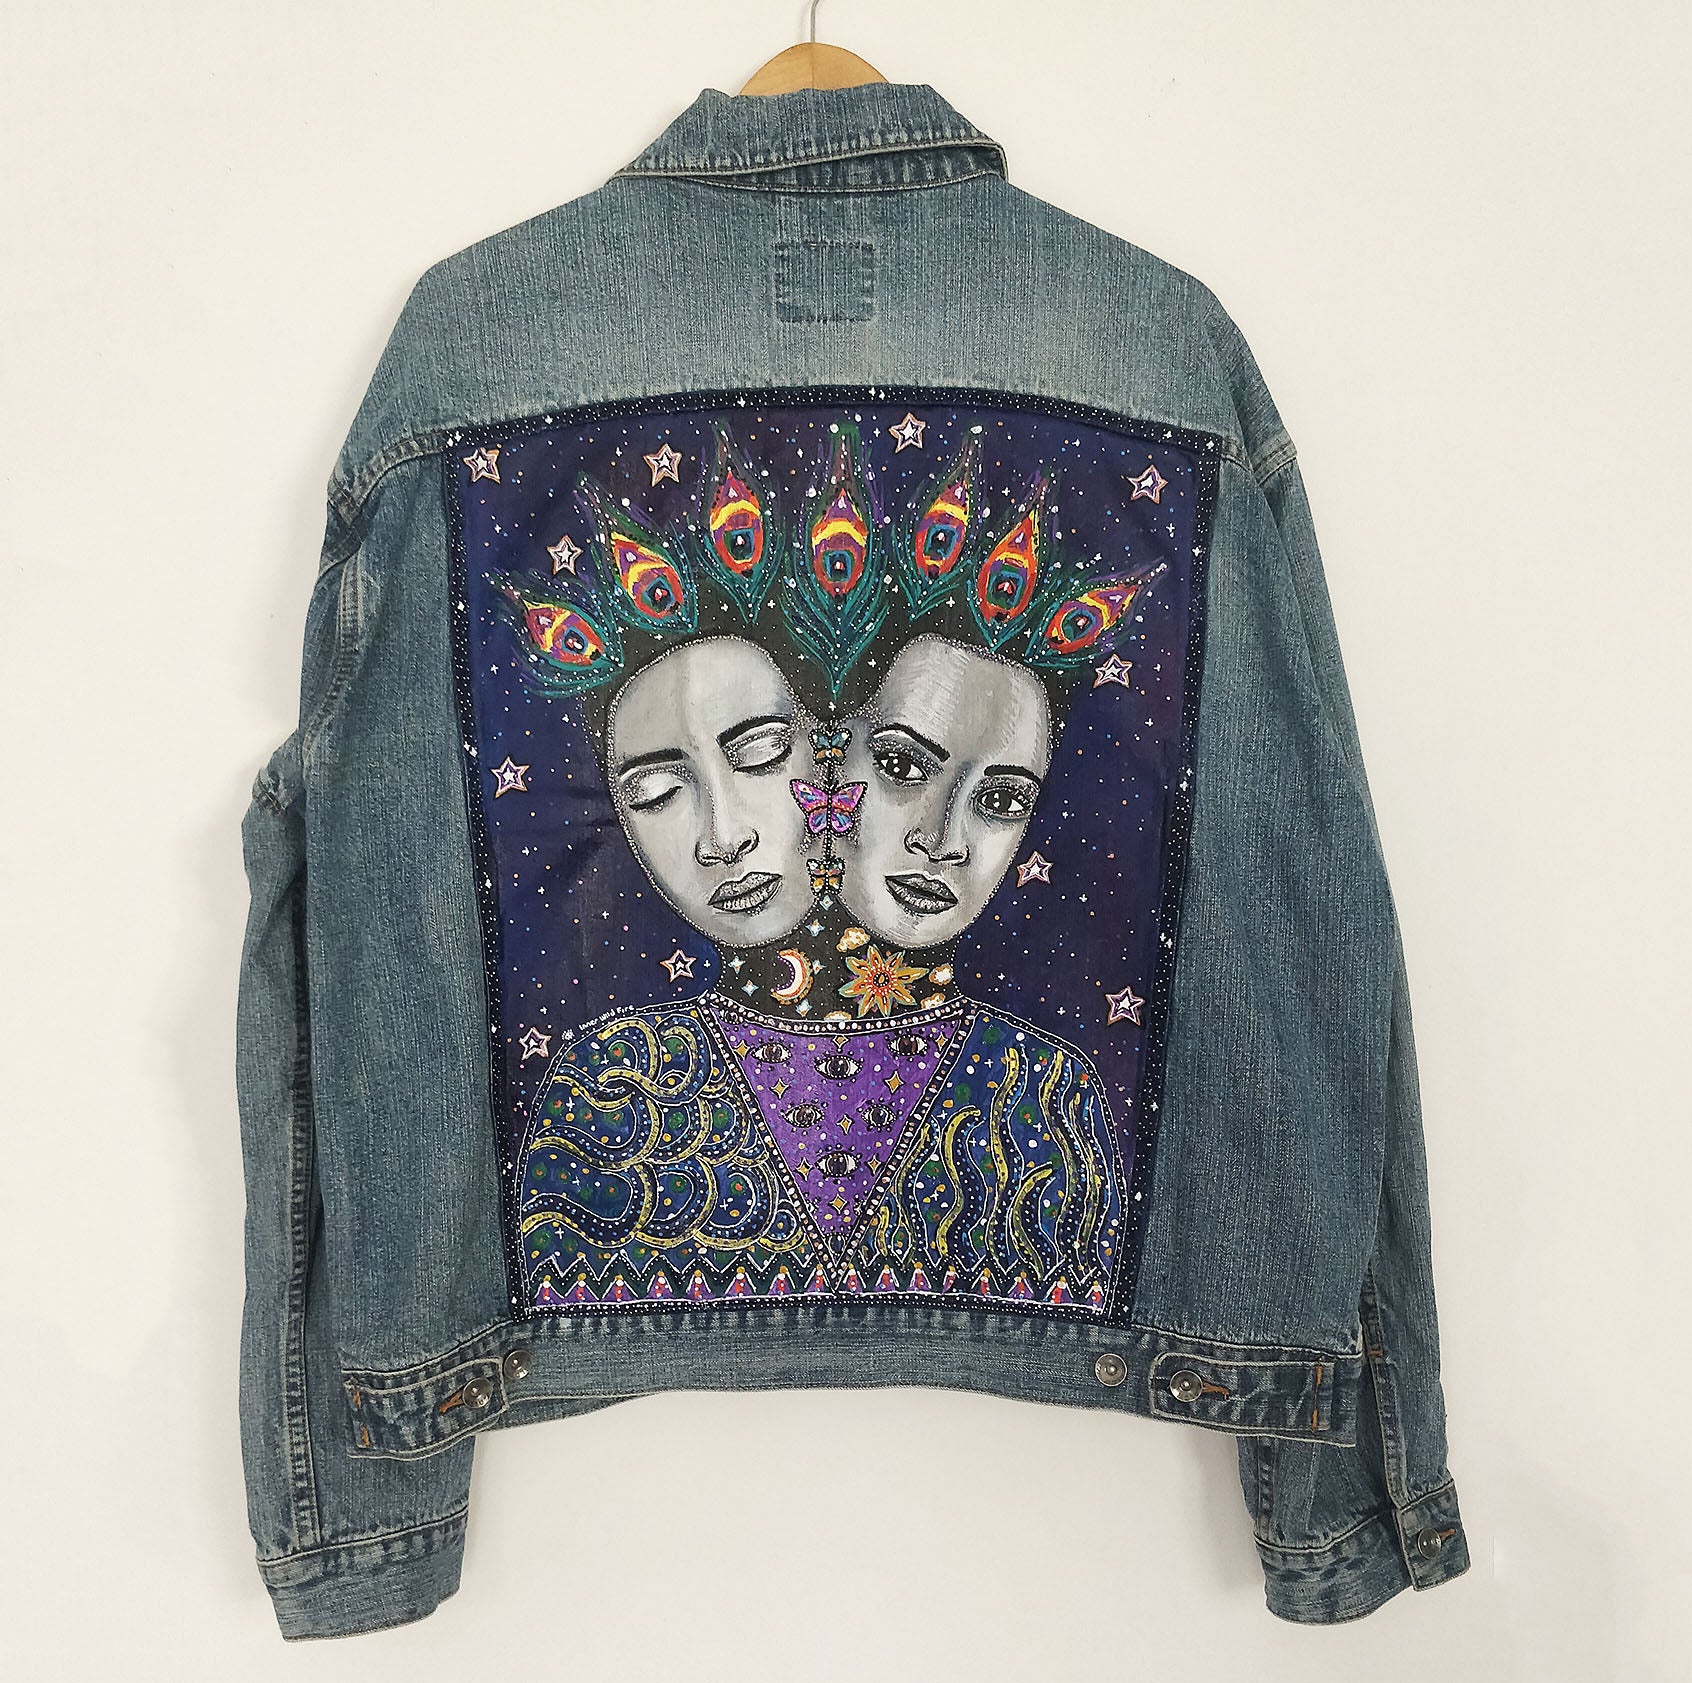 Gemini Hand Painted One Of A Kind M Denim Jacket